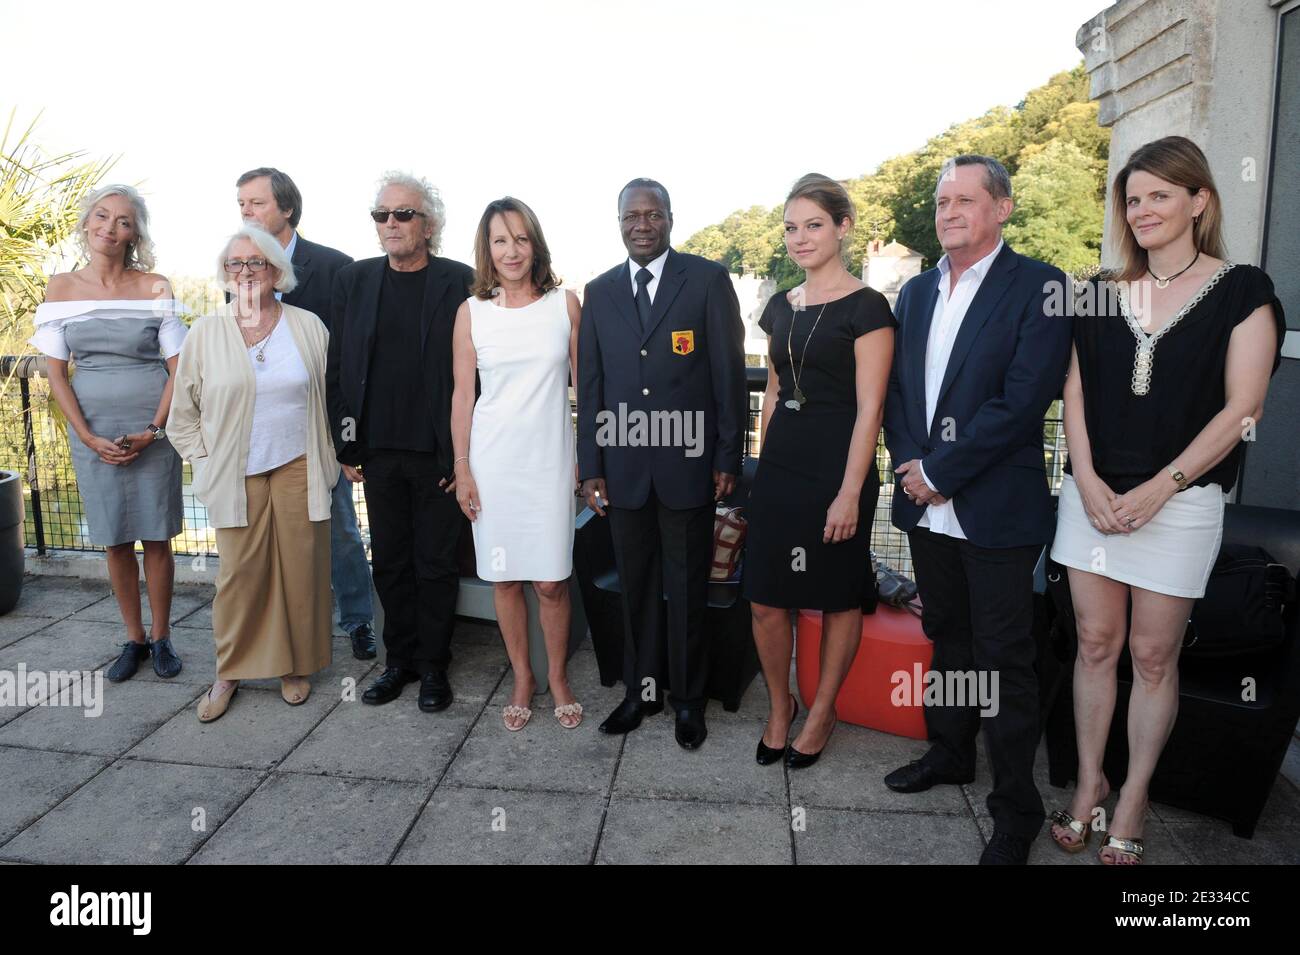 L to R) Members of the jury Dora Bouchoucha, Bruno Cras, Micheline Presle,  Luc Plamondon, Nathalie Baye (president), Michel Ouedraogo, Emilie  Dequenne, Nicolas Stell and Lea Frazer pose on August 25, 2010